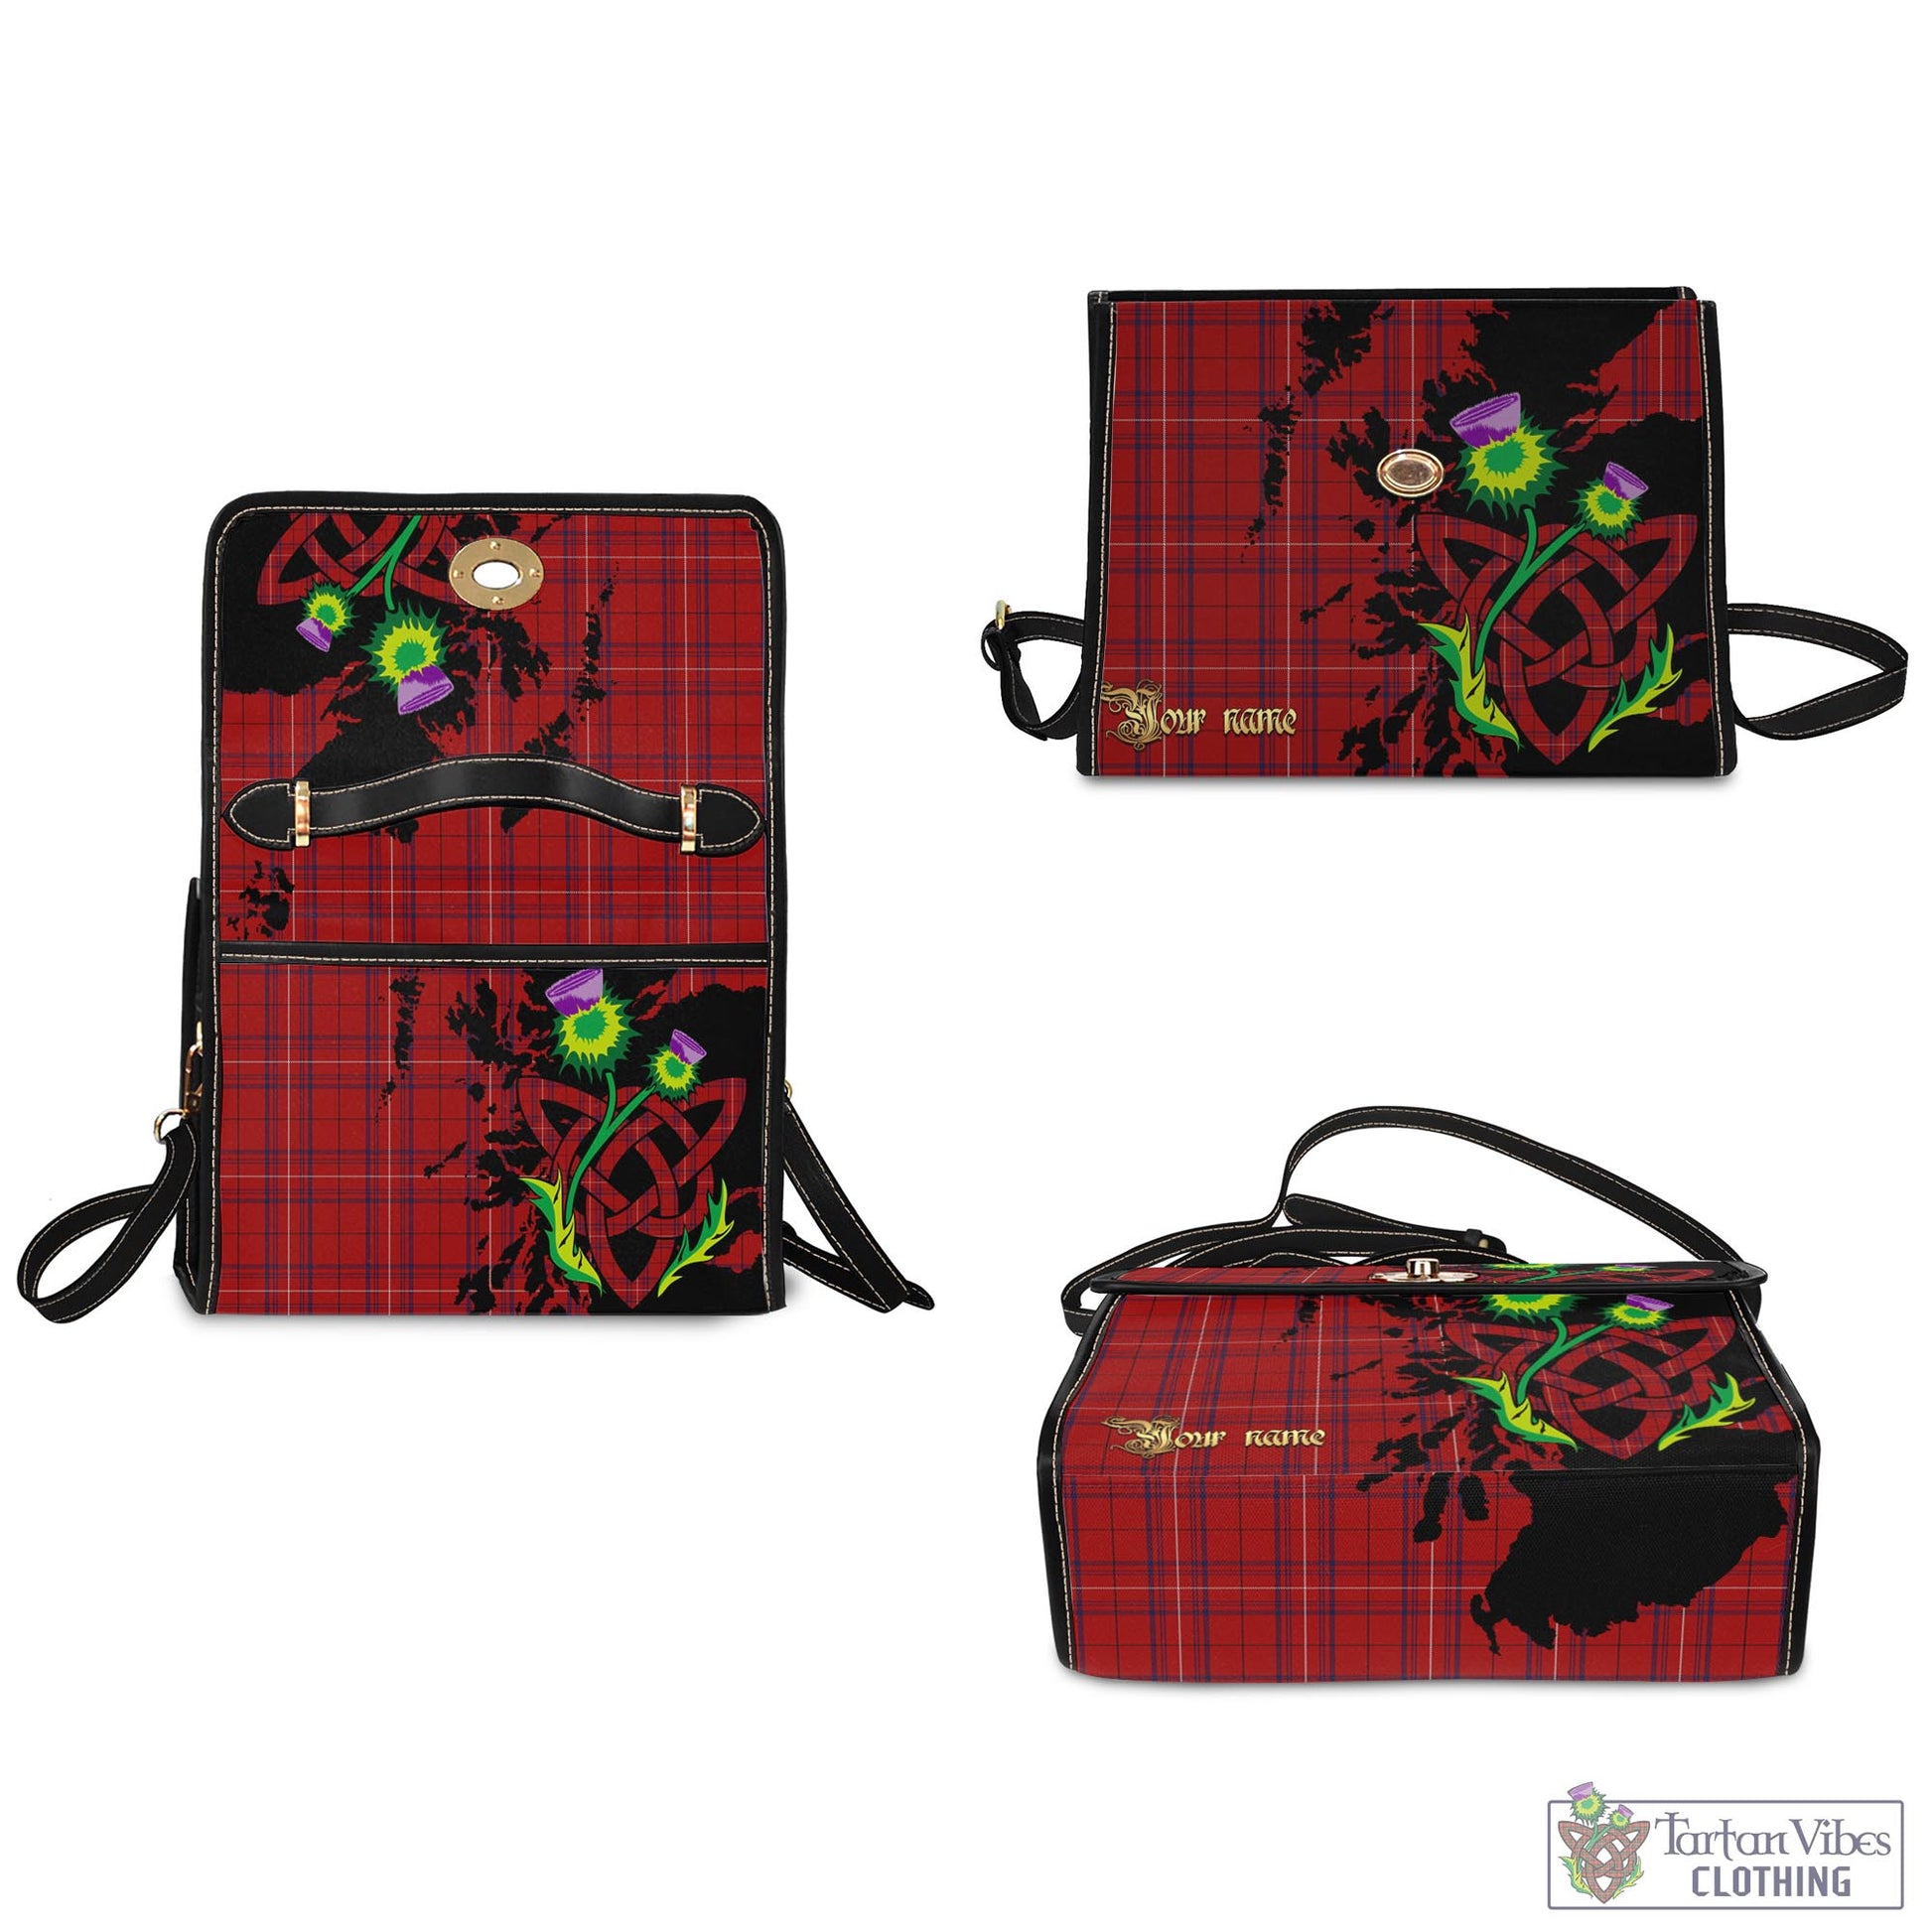 Tartan Vibes Clothing Rose of Kilravock Tartan Waterproof Canvas Bag with Scotland Map and Thistle Celtic Accents